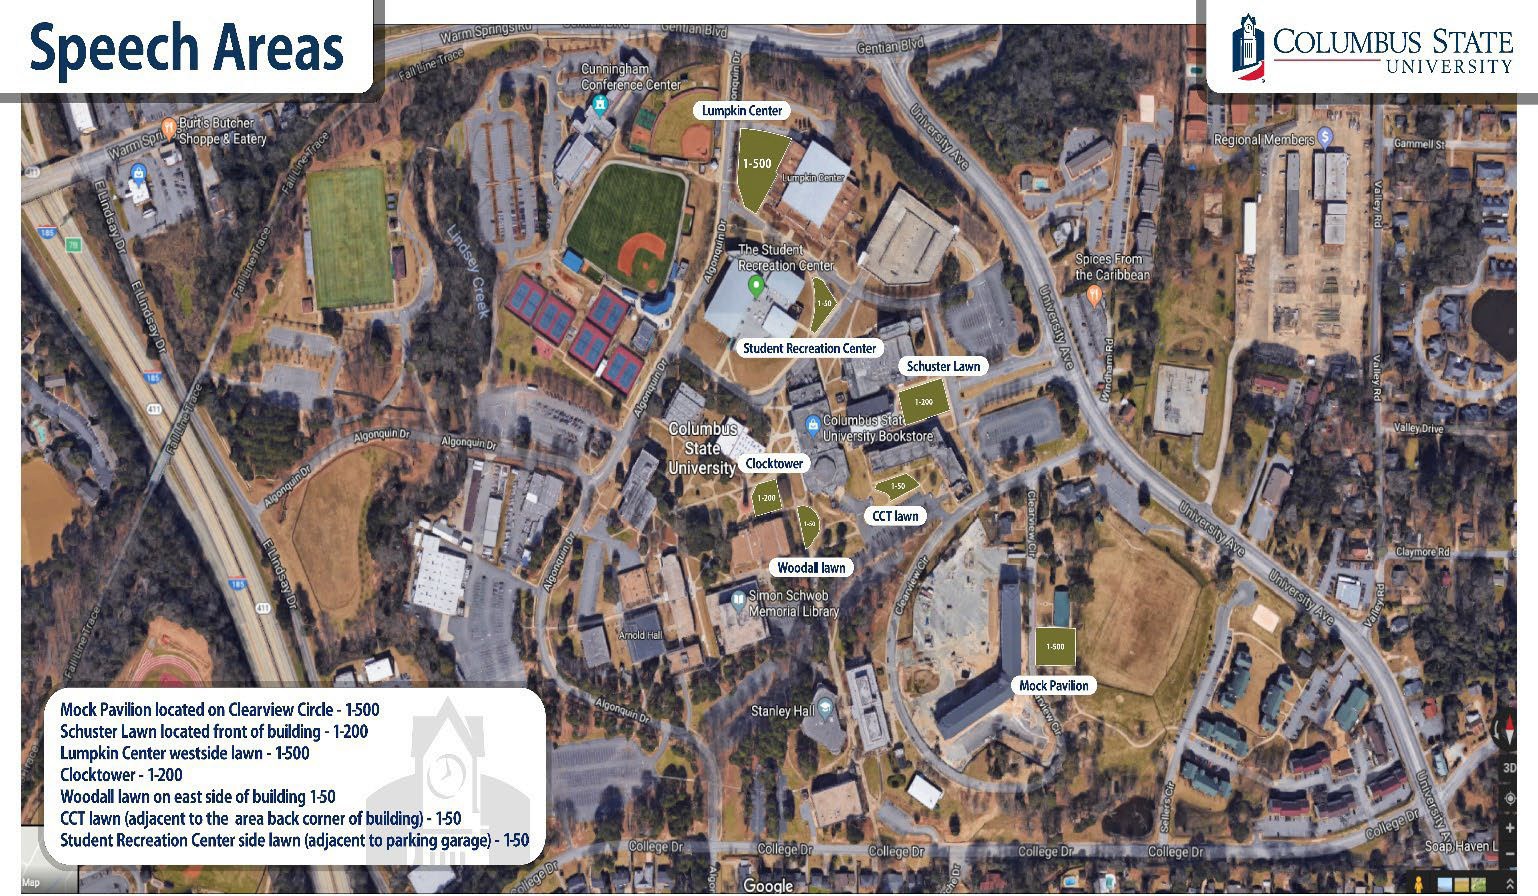 Main Campus Map of Designated areas for freedom of expression